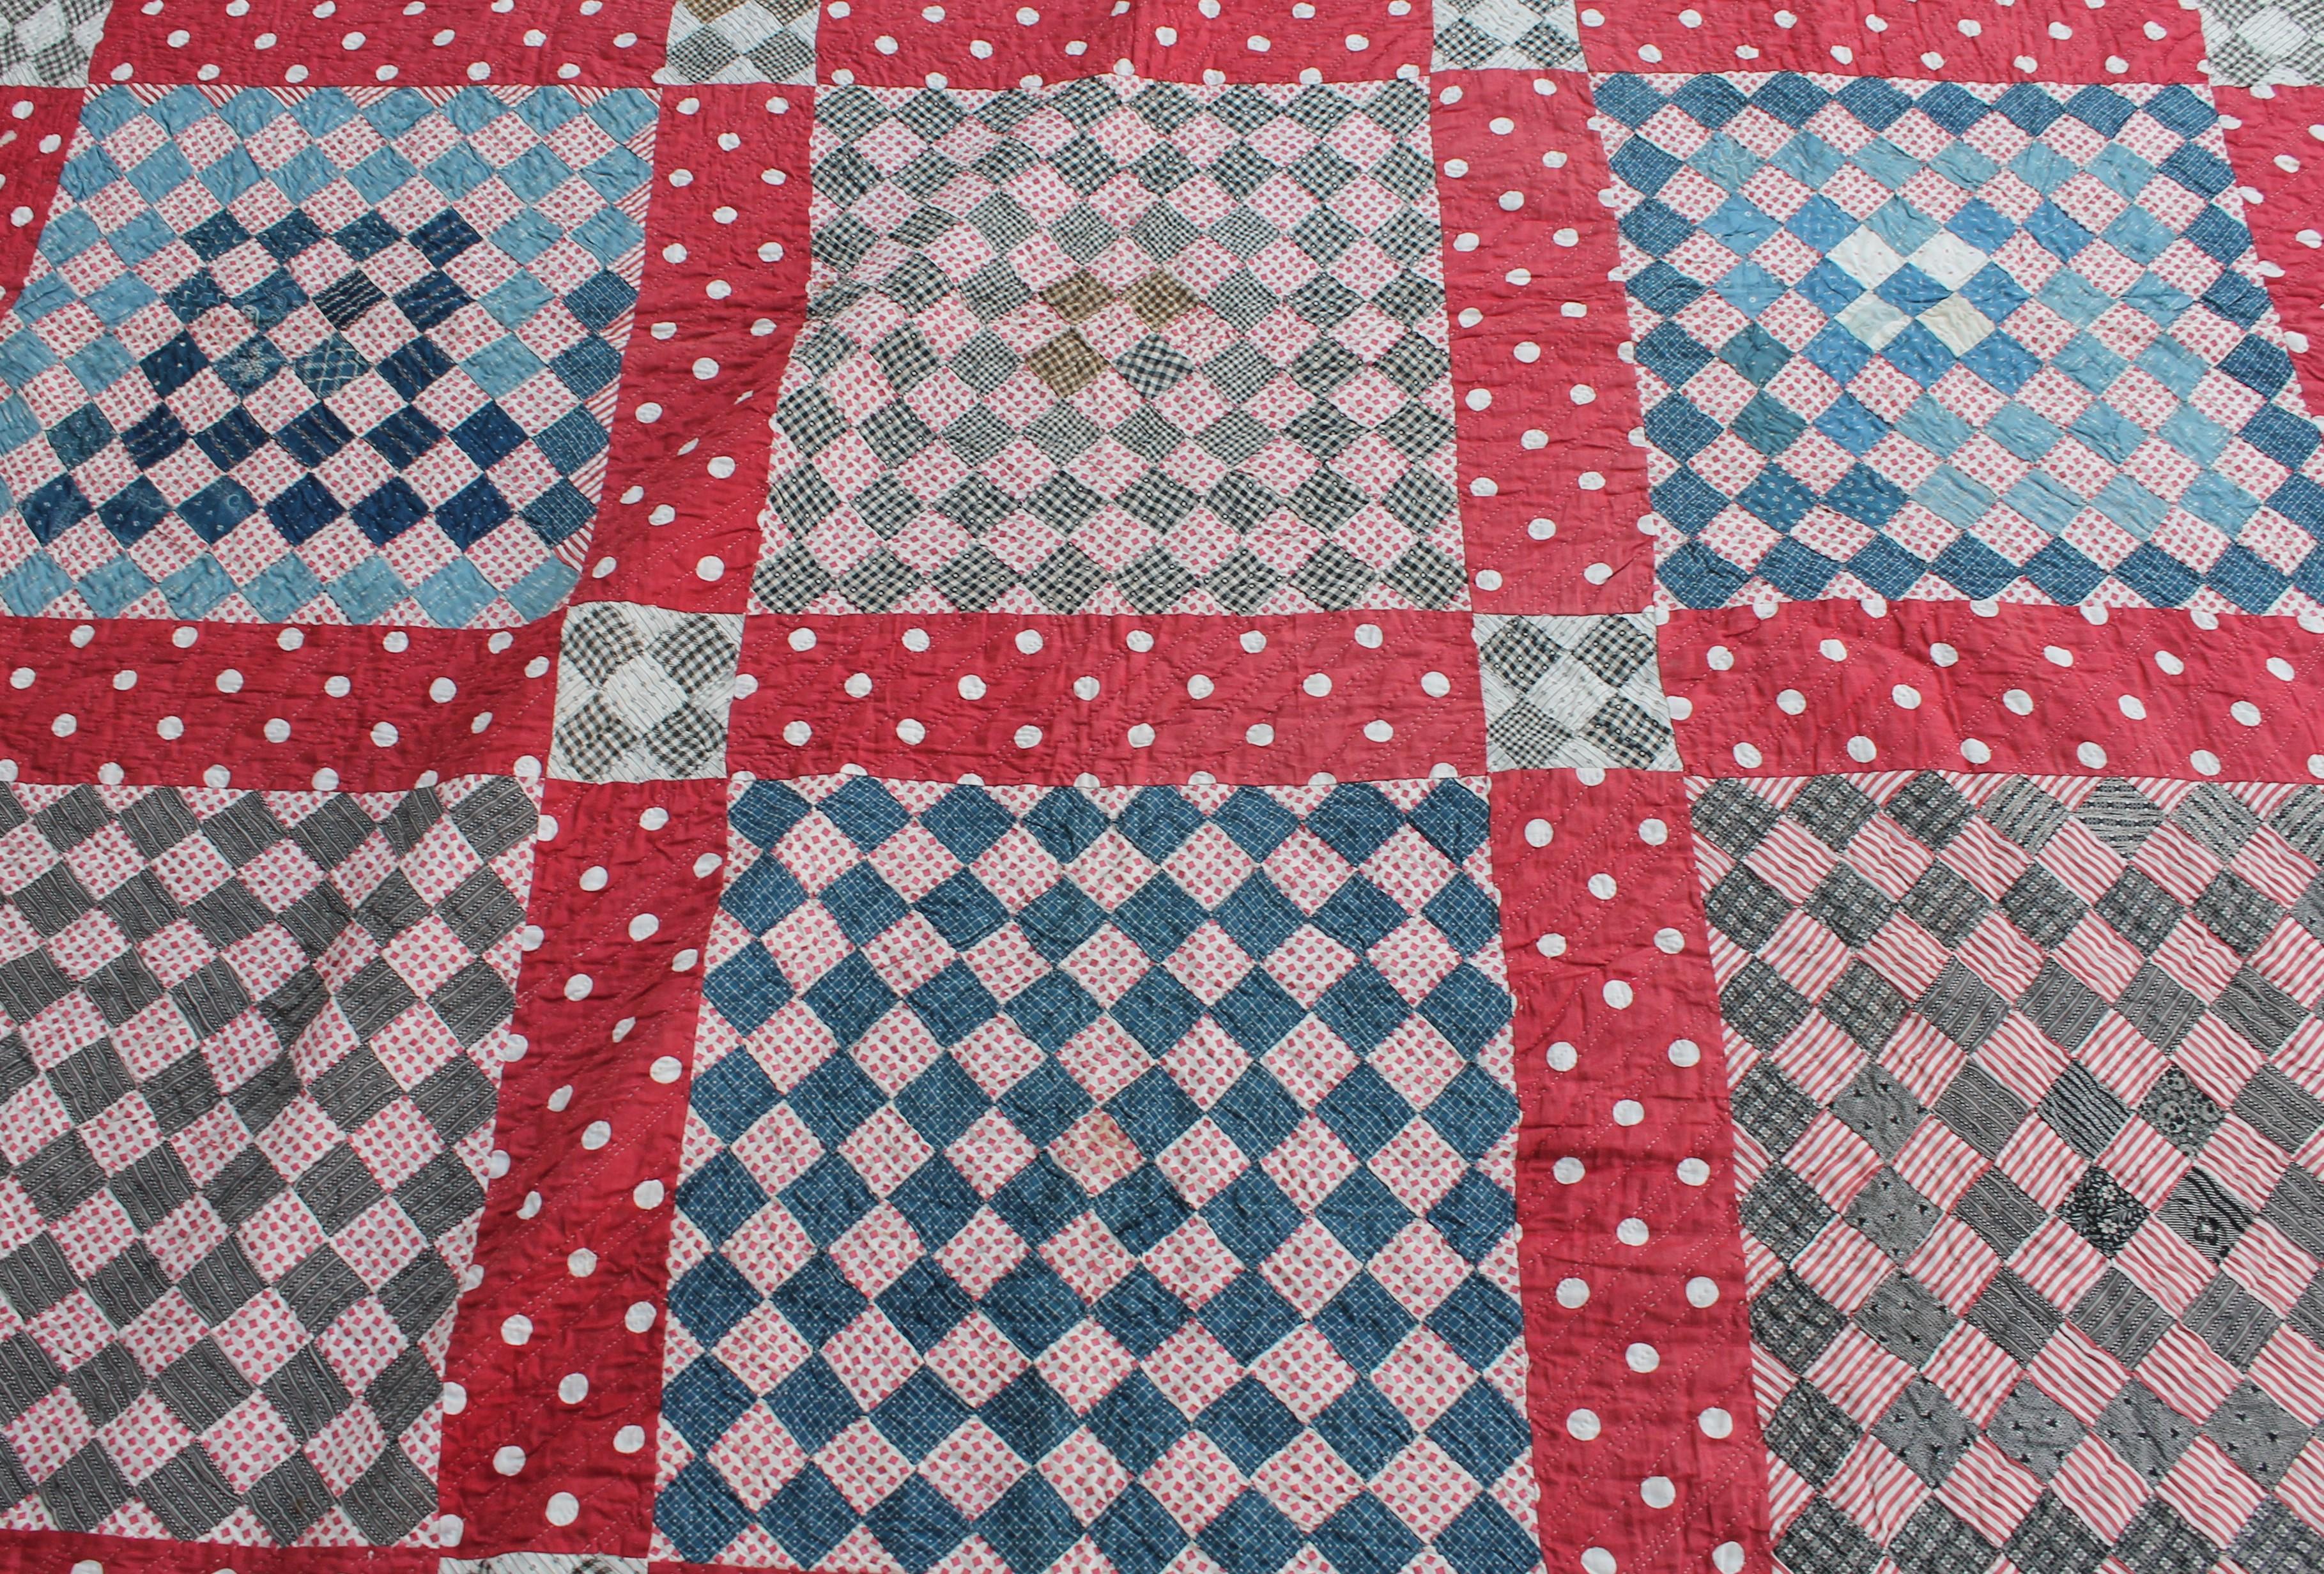 This finely pieced contained postage stamp quilt is in good condition with a overall even fade throughout but in good condition. Great piecework and quilting.